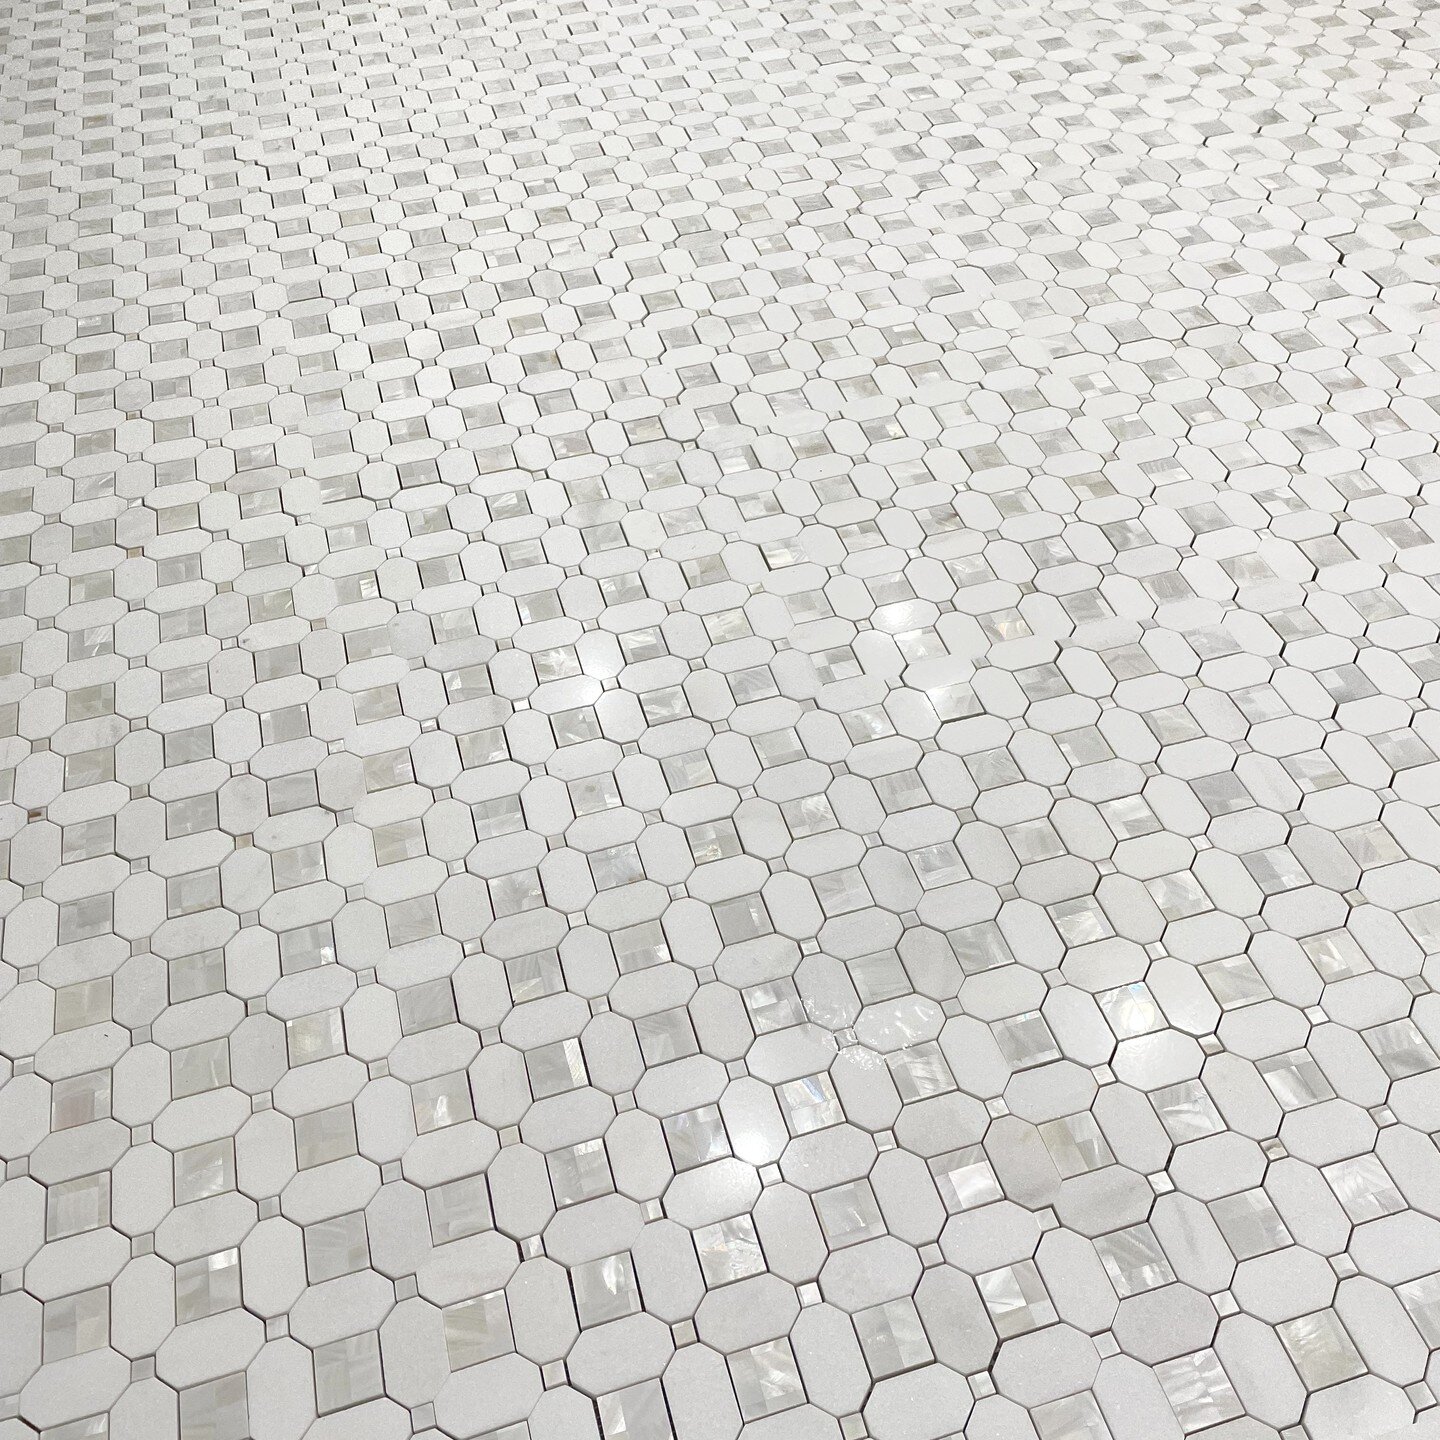 Our renovation project has turned the corner from demo to rebuild. The tile in our primary bathroom is one of my favorite details! 

#thassos #pearltile #jillraedesigns #kingswood